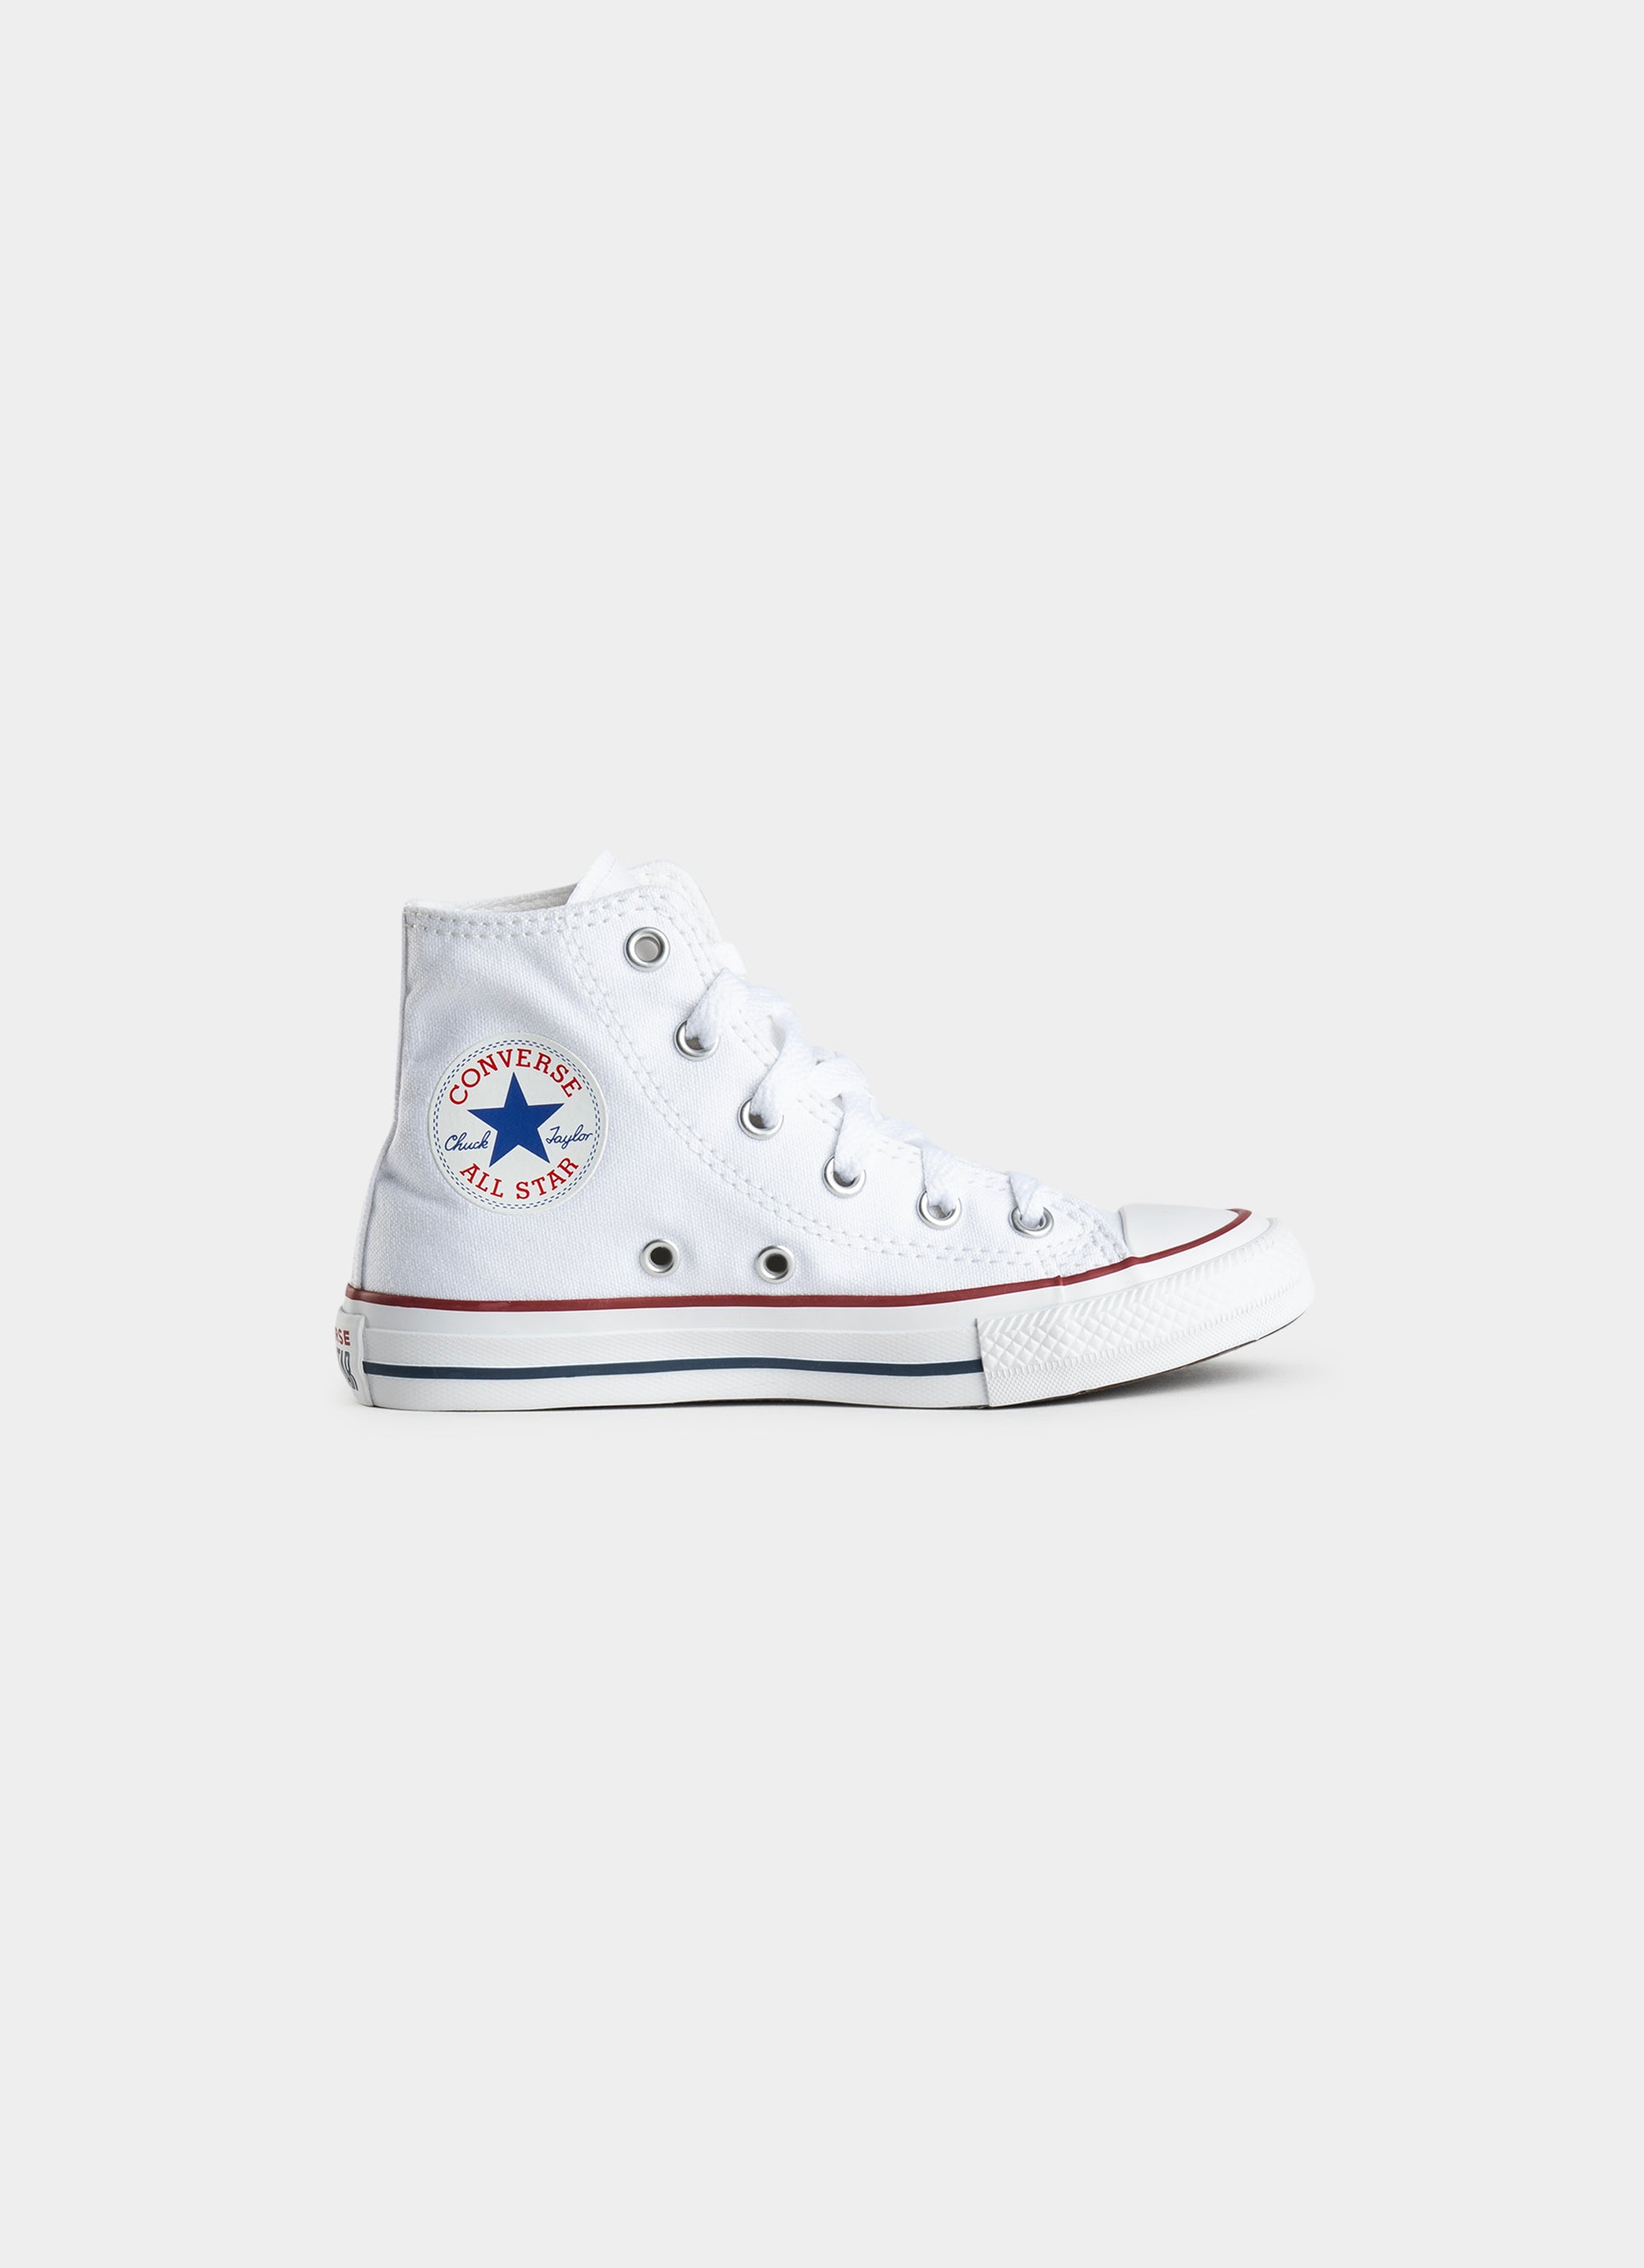 Converse Chuck Taylor All Star Low Shoe - Kids | Converse | Red Rat